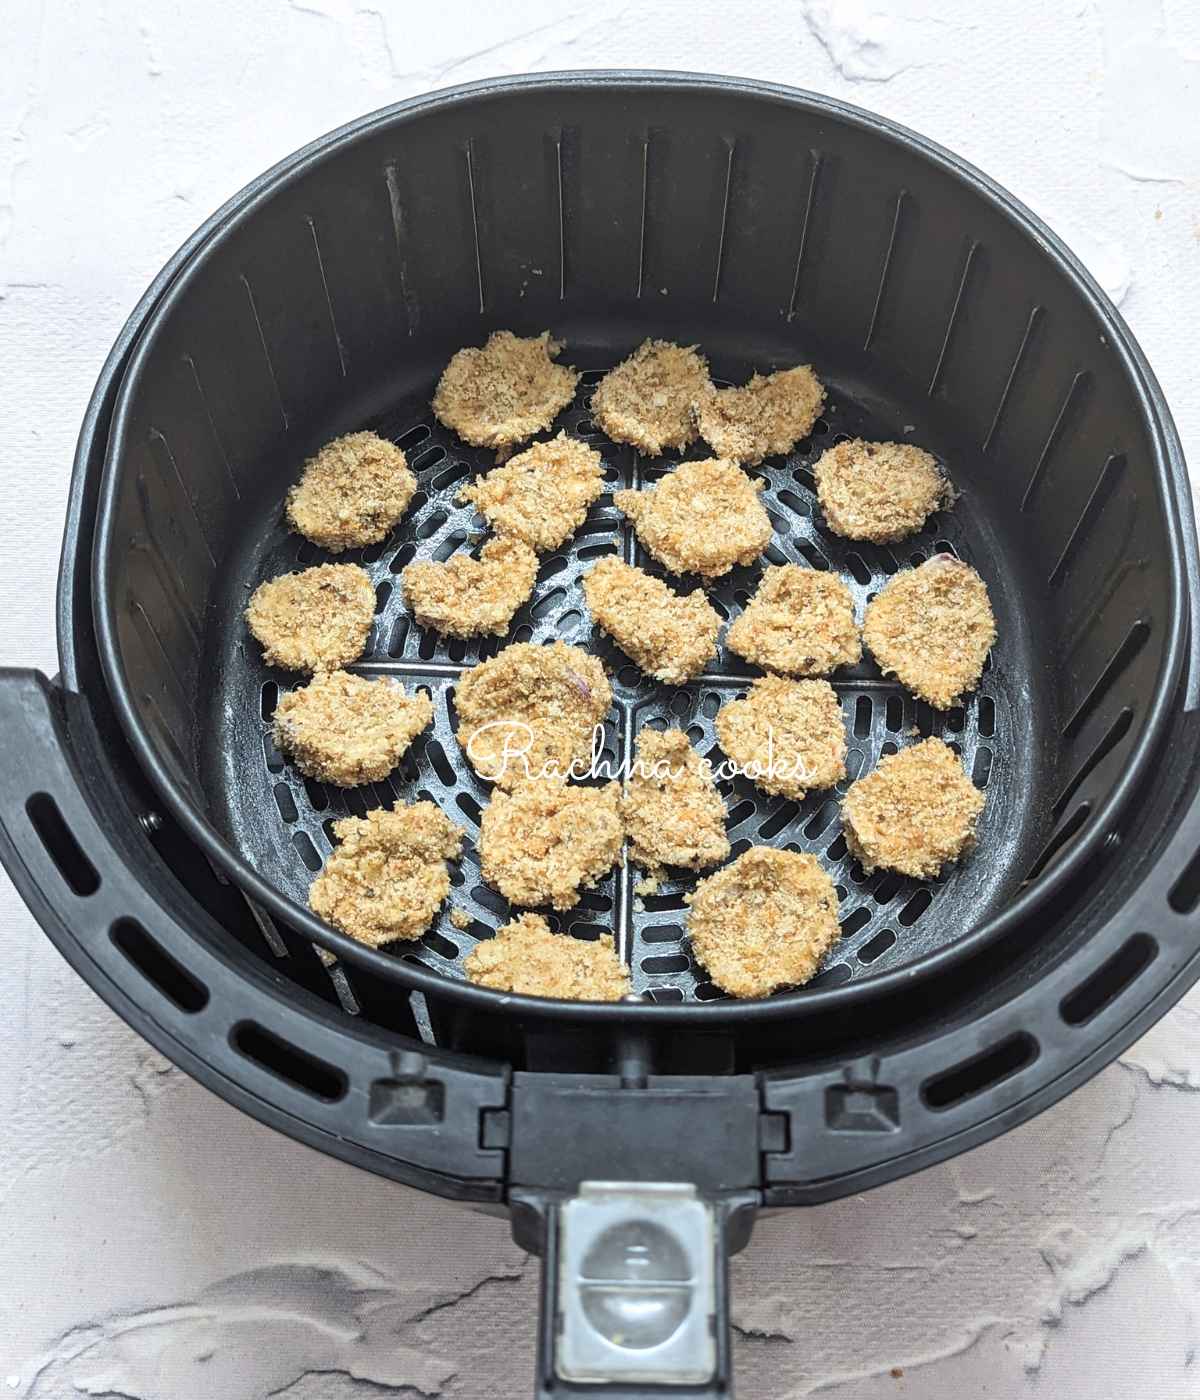 Breaded onion petals placed in air fryer basket.